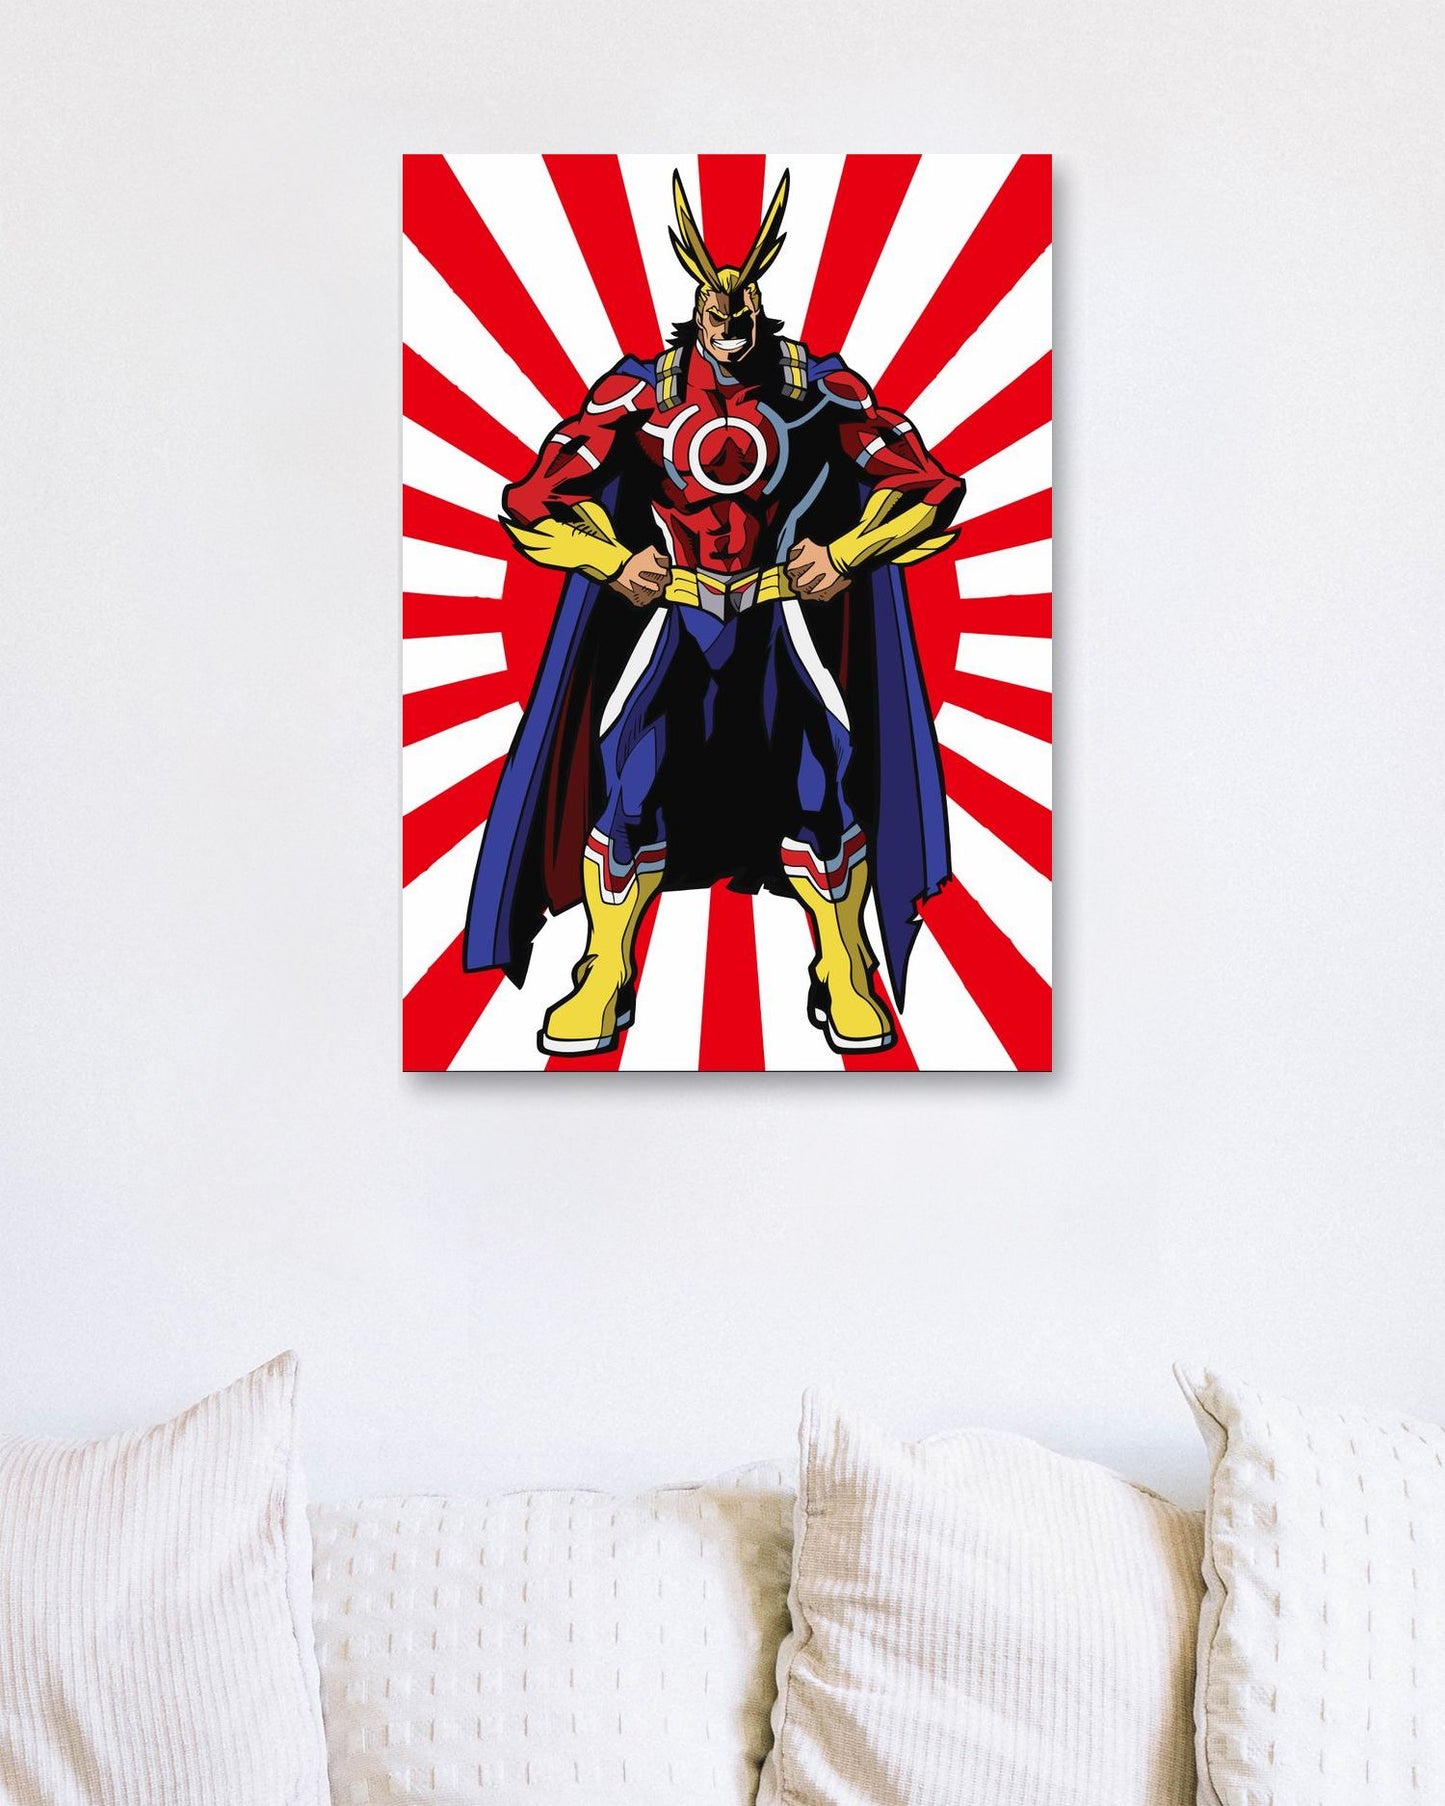 all might the one for all - @fillart